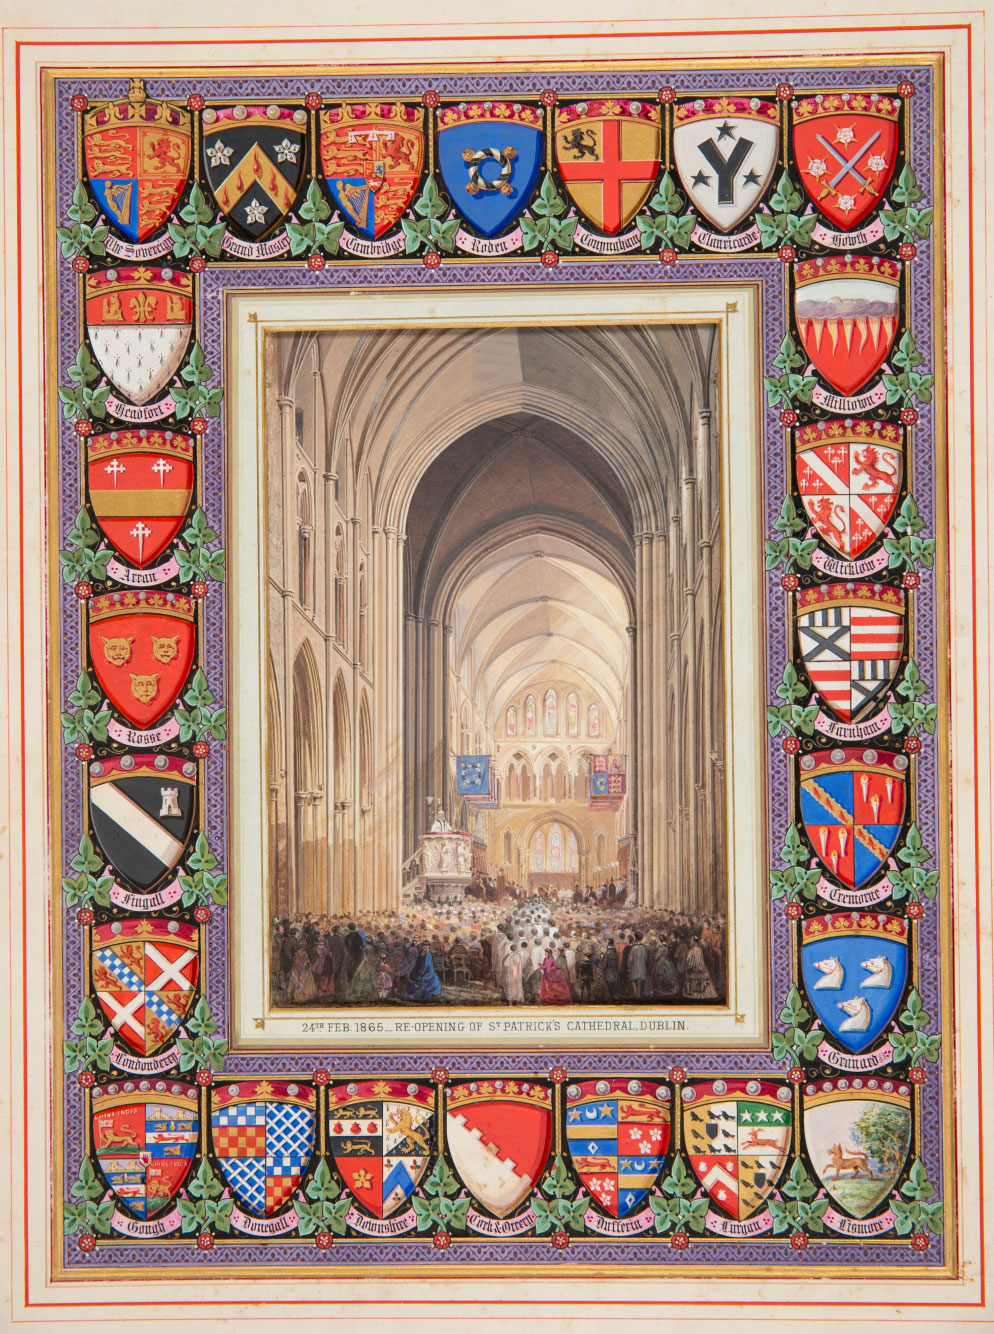 Illuminated book of thanks presented to Benjamin Lee Guinness on the re-opening of St Patrick's Cathedral, the restoration of which he funded, 1865.